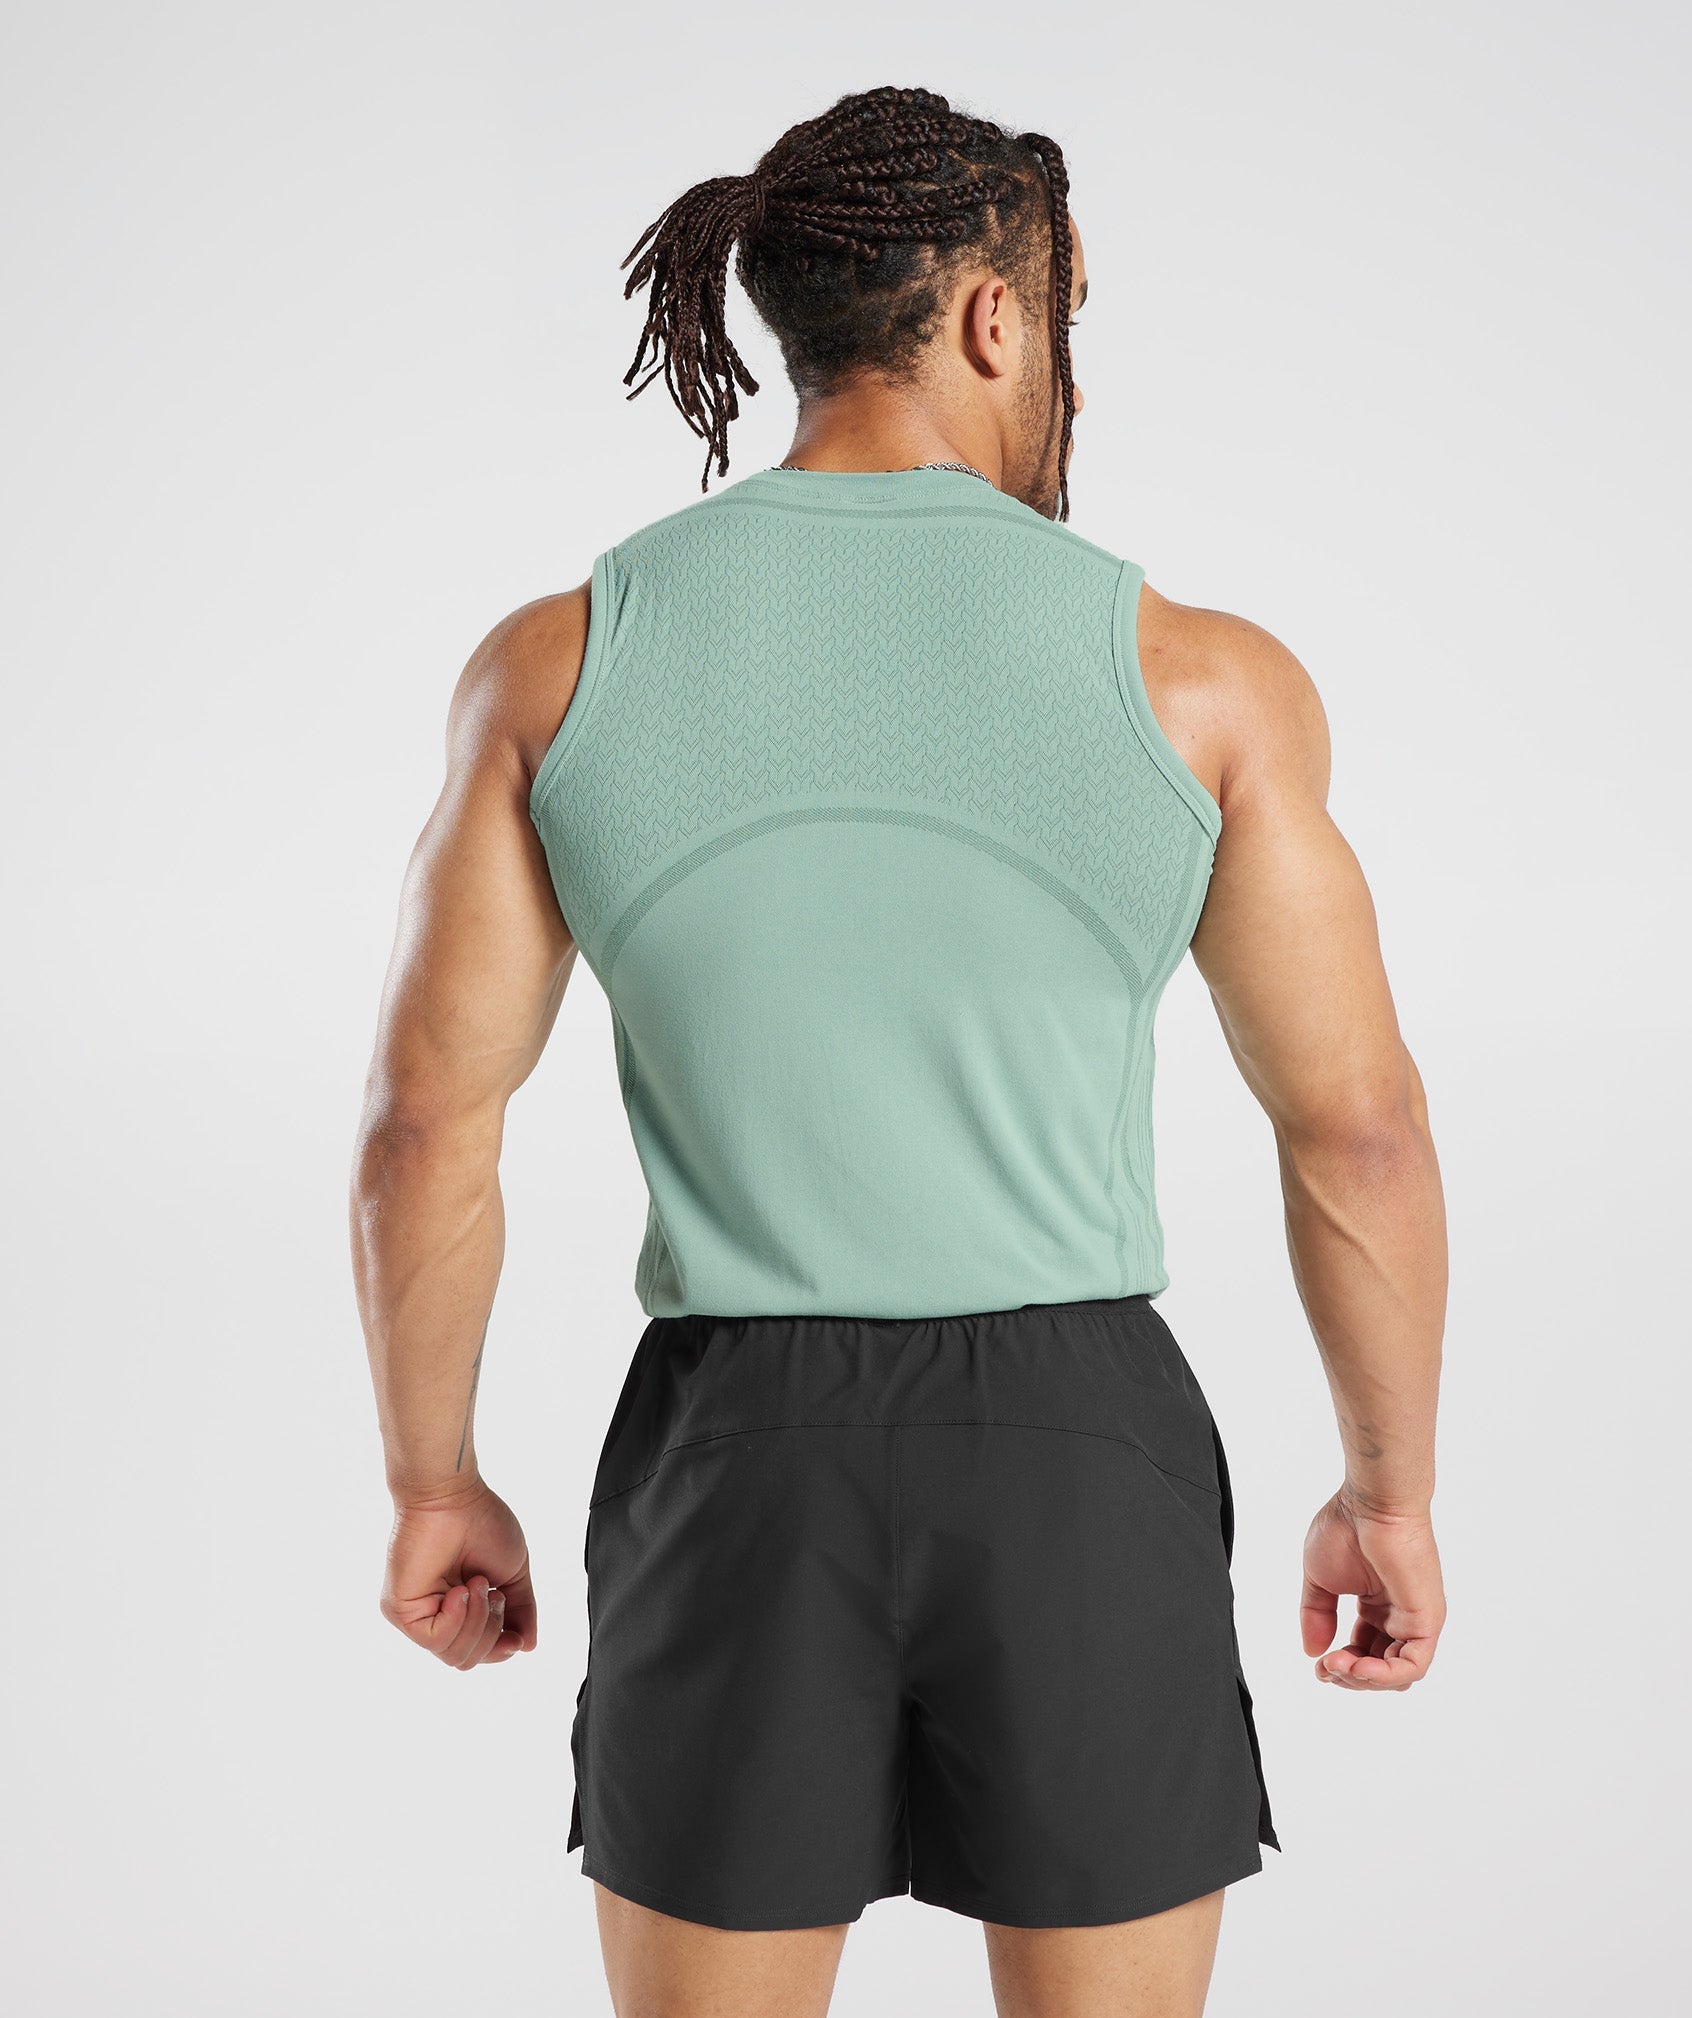 315 Seamless Tank in Frost Teal/Ink Teal - view 2